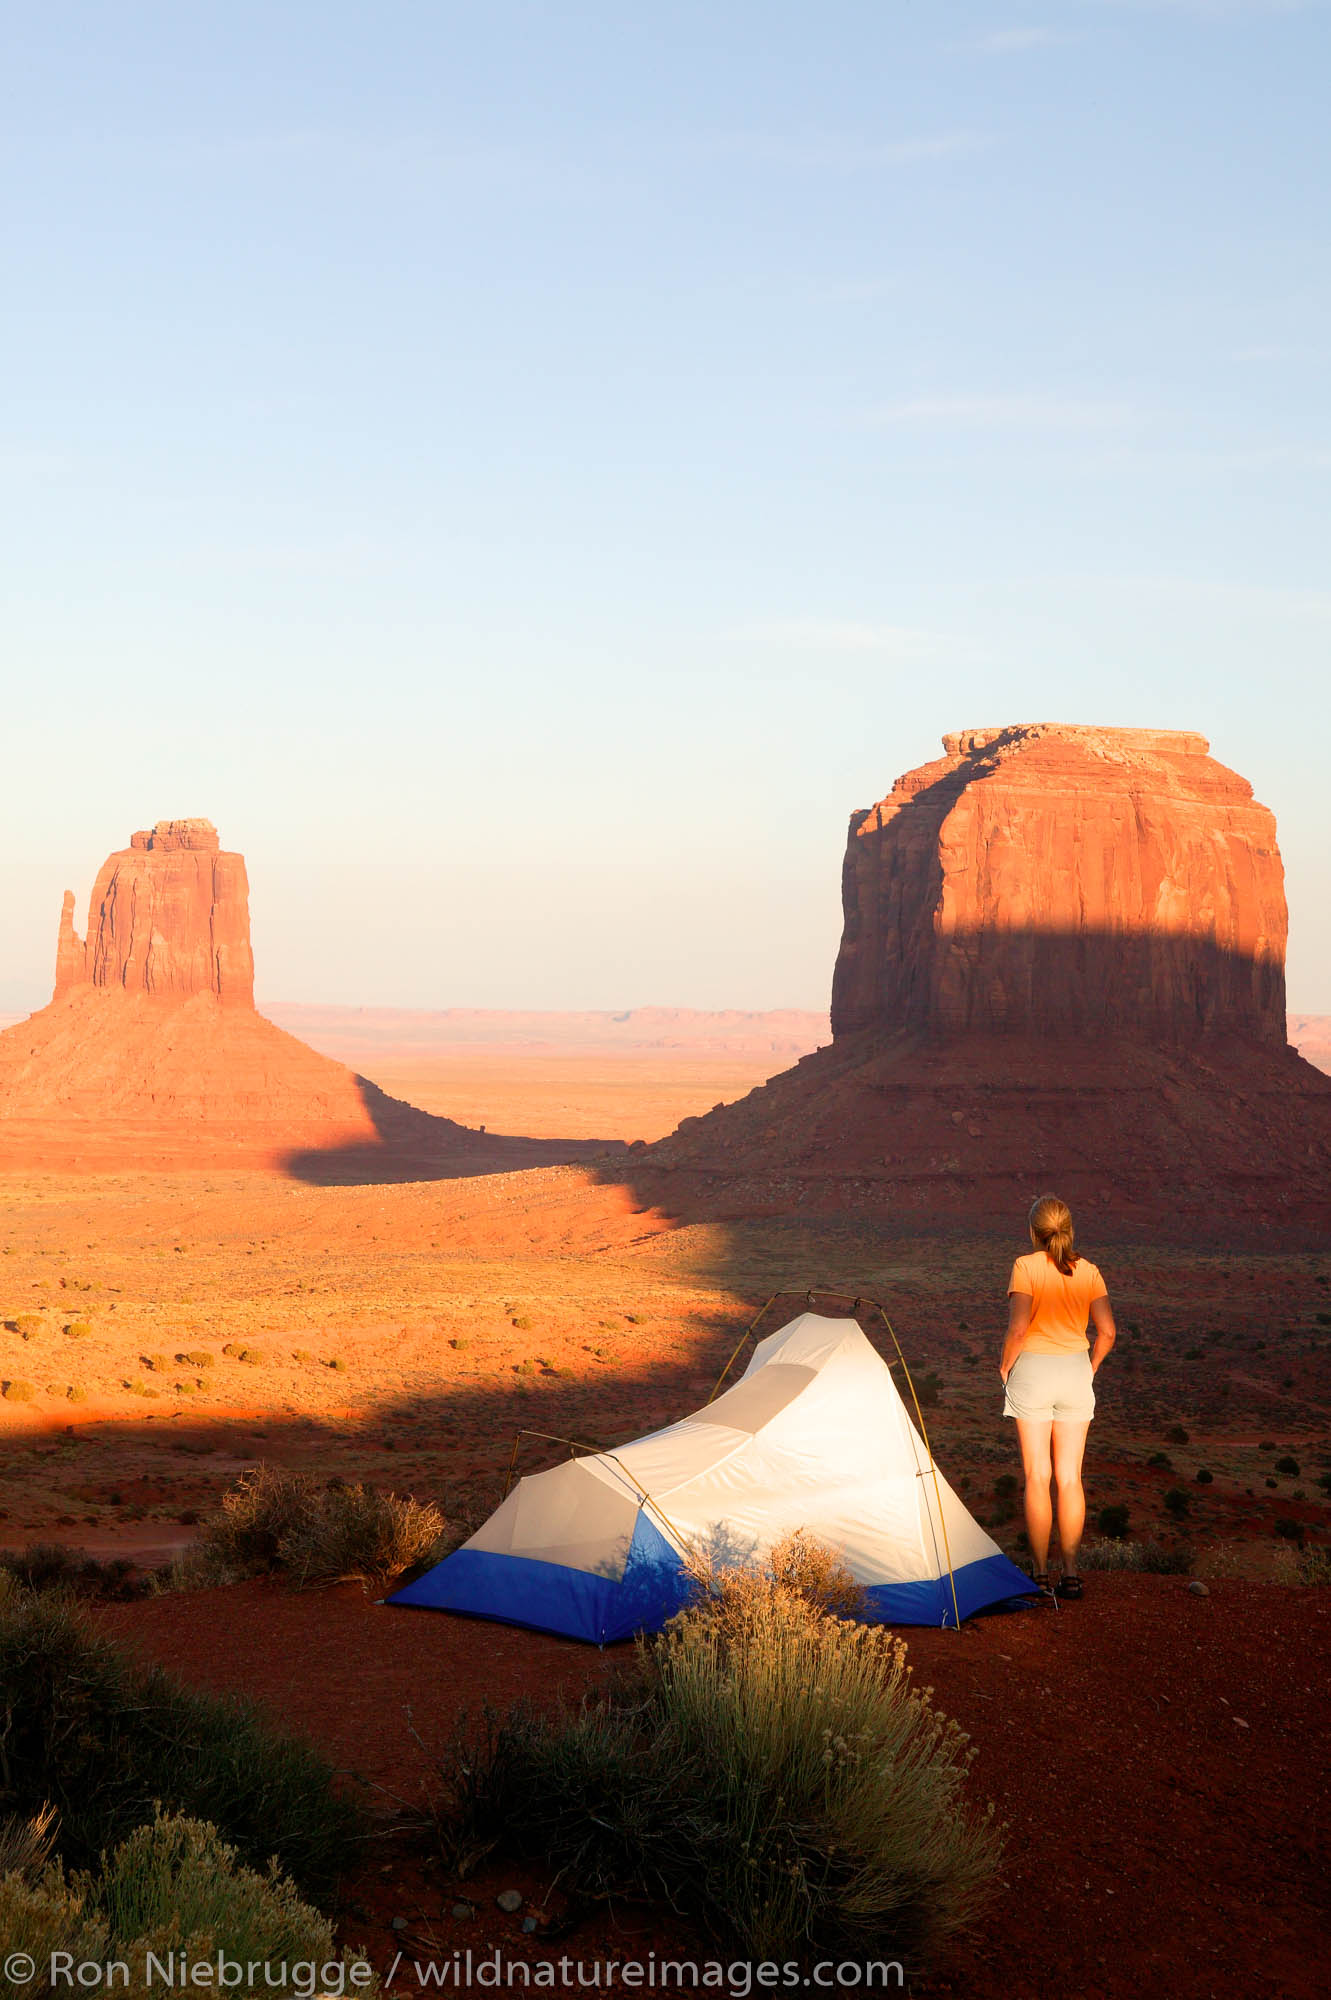 A visitor enjoys the view from camp of Monument Valley Navajo Tribal Park, Utah.  (model released)